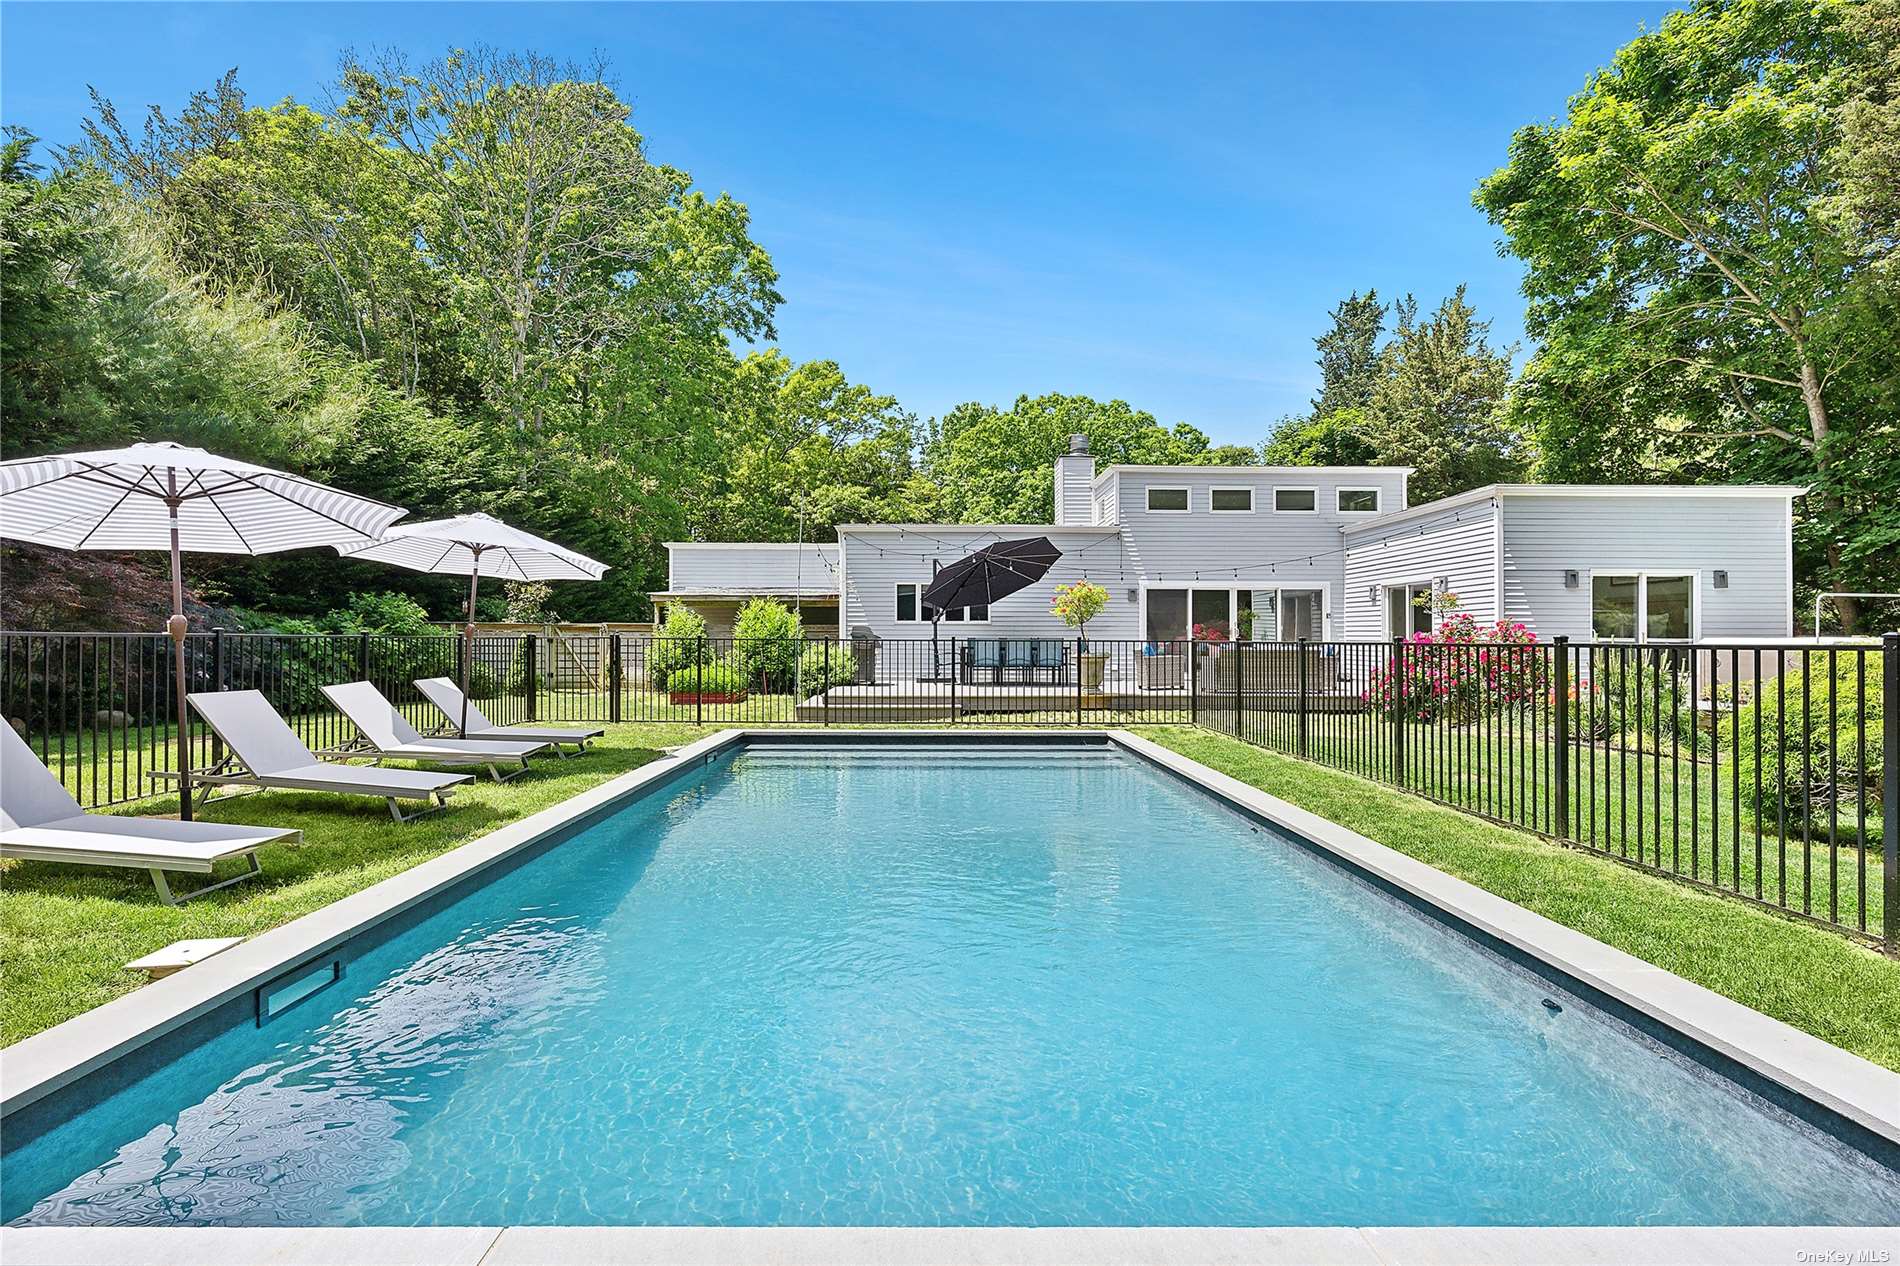 Property for Sale at 5 Orchard Lane, East Hampton, Hamptons, NY - Bedrooms: 3 
Bathrooms: 3.5  - $2,300,000